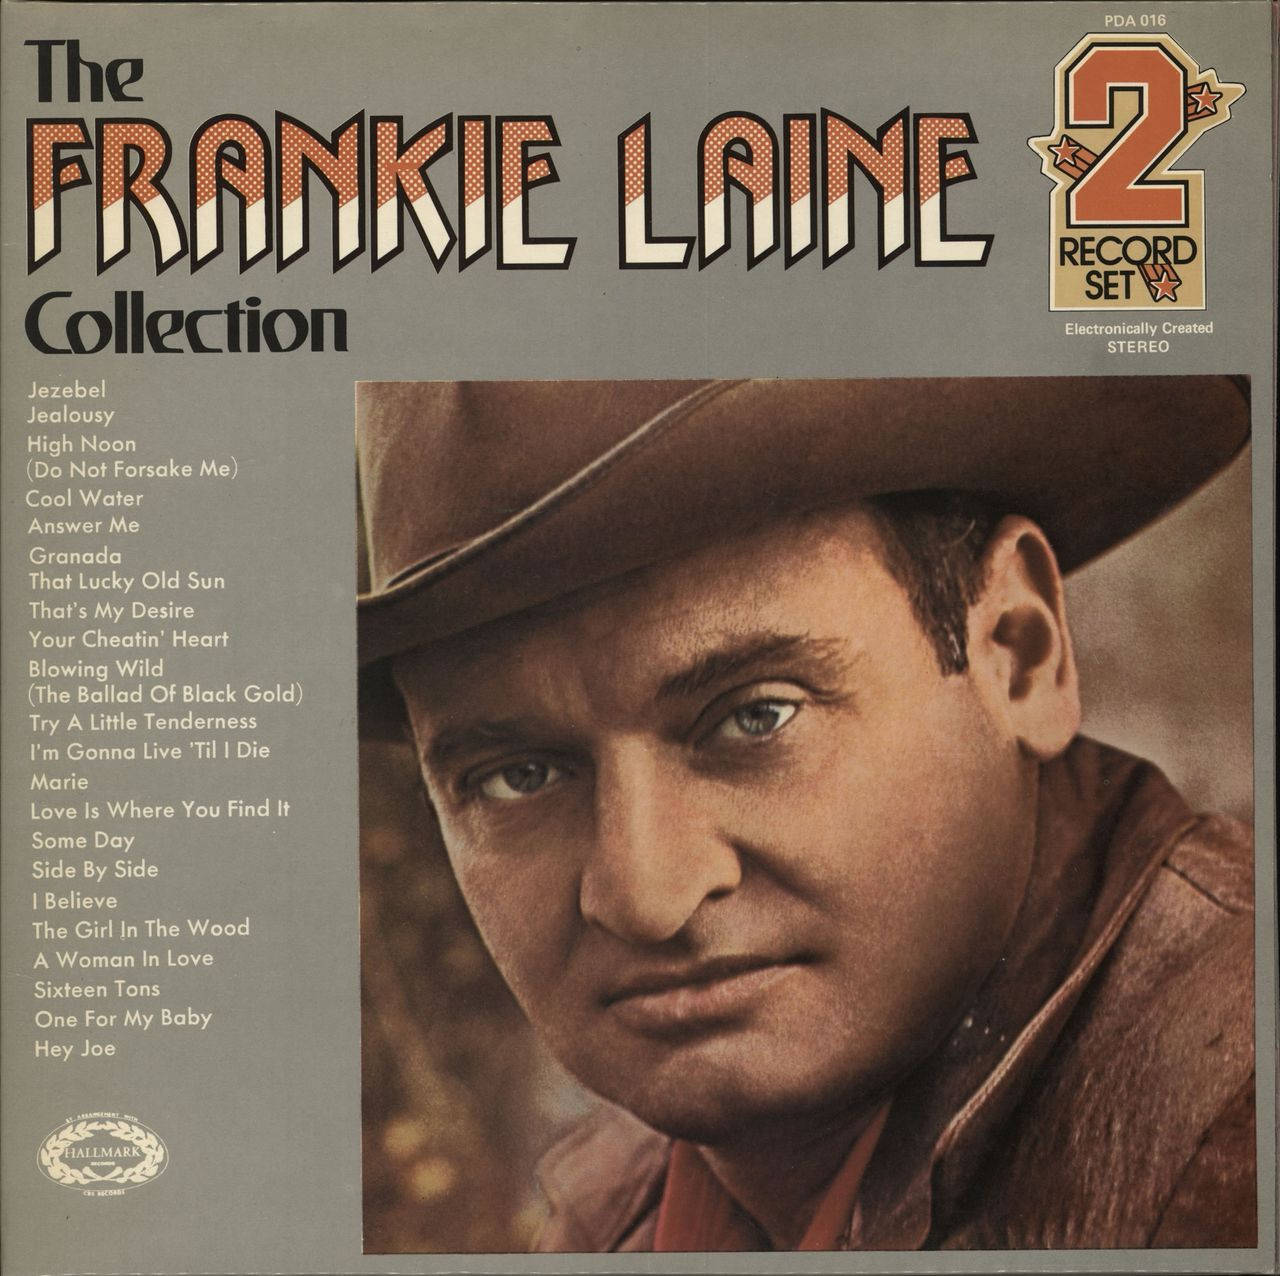 The Frankie Laine Collection Number 2 Record Set Album Cover Wallpaper